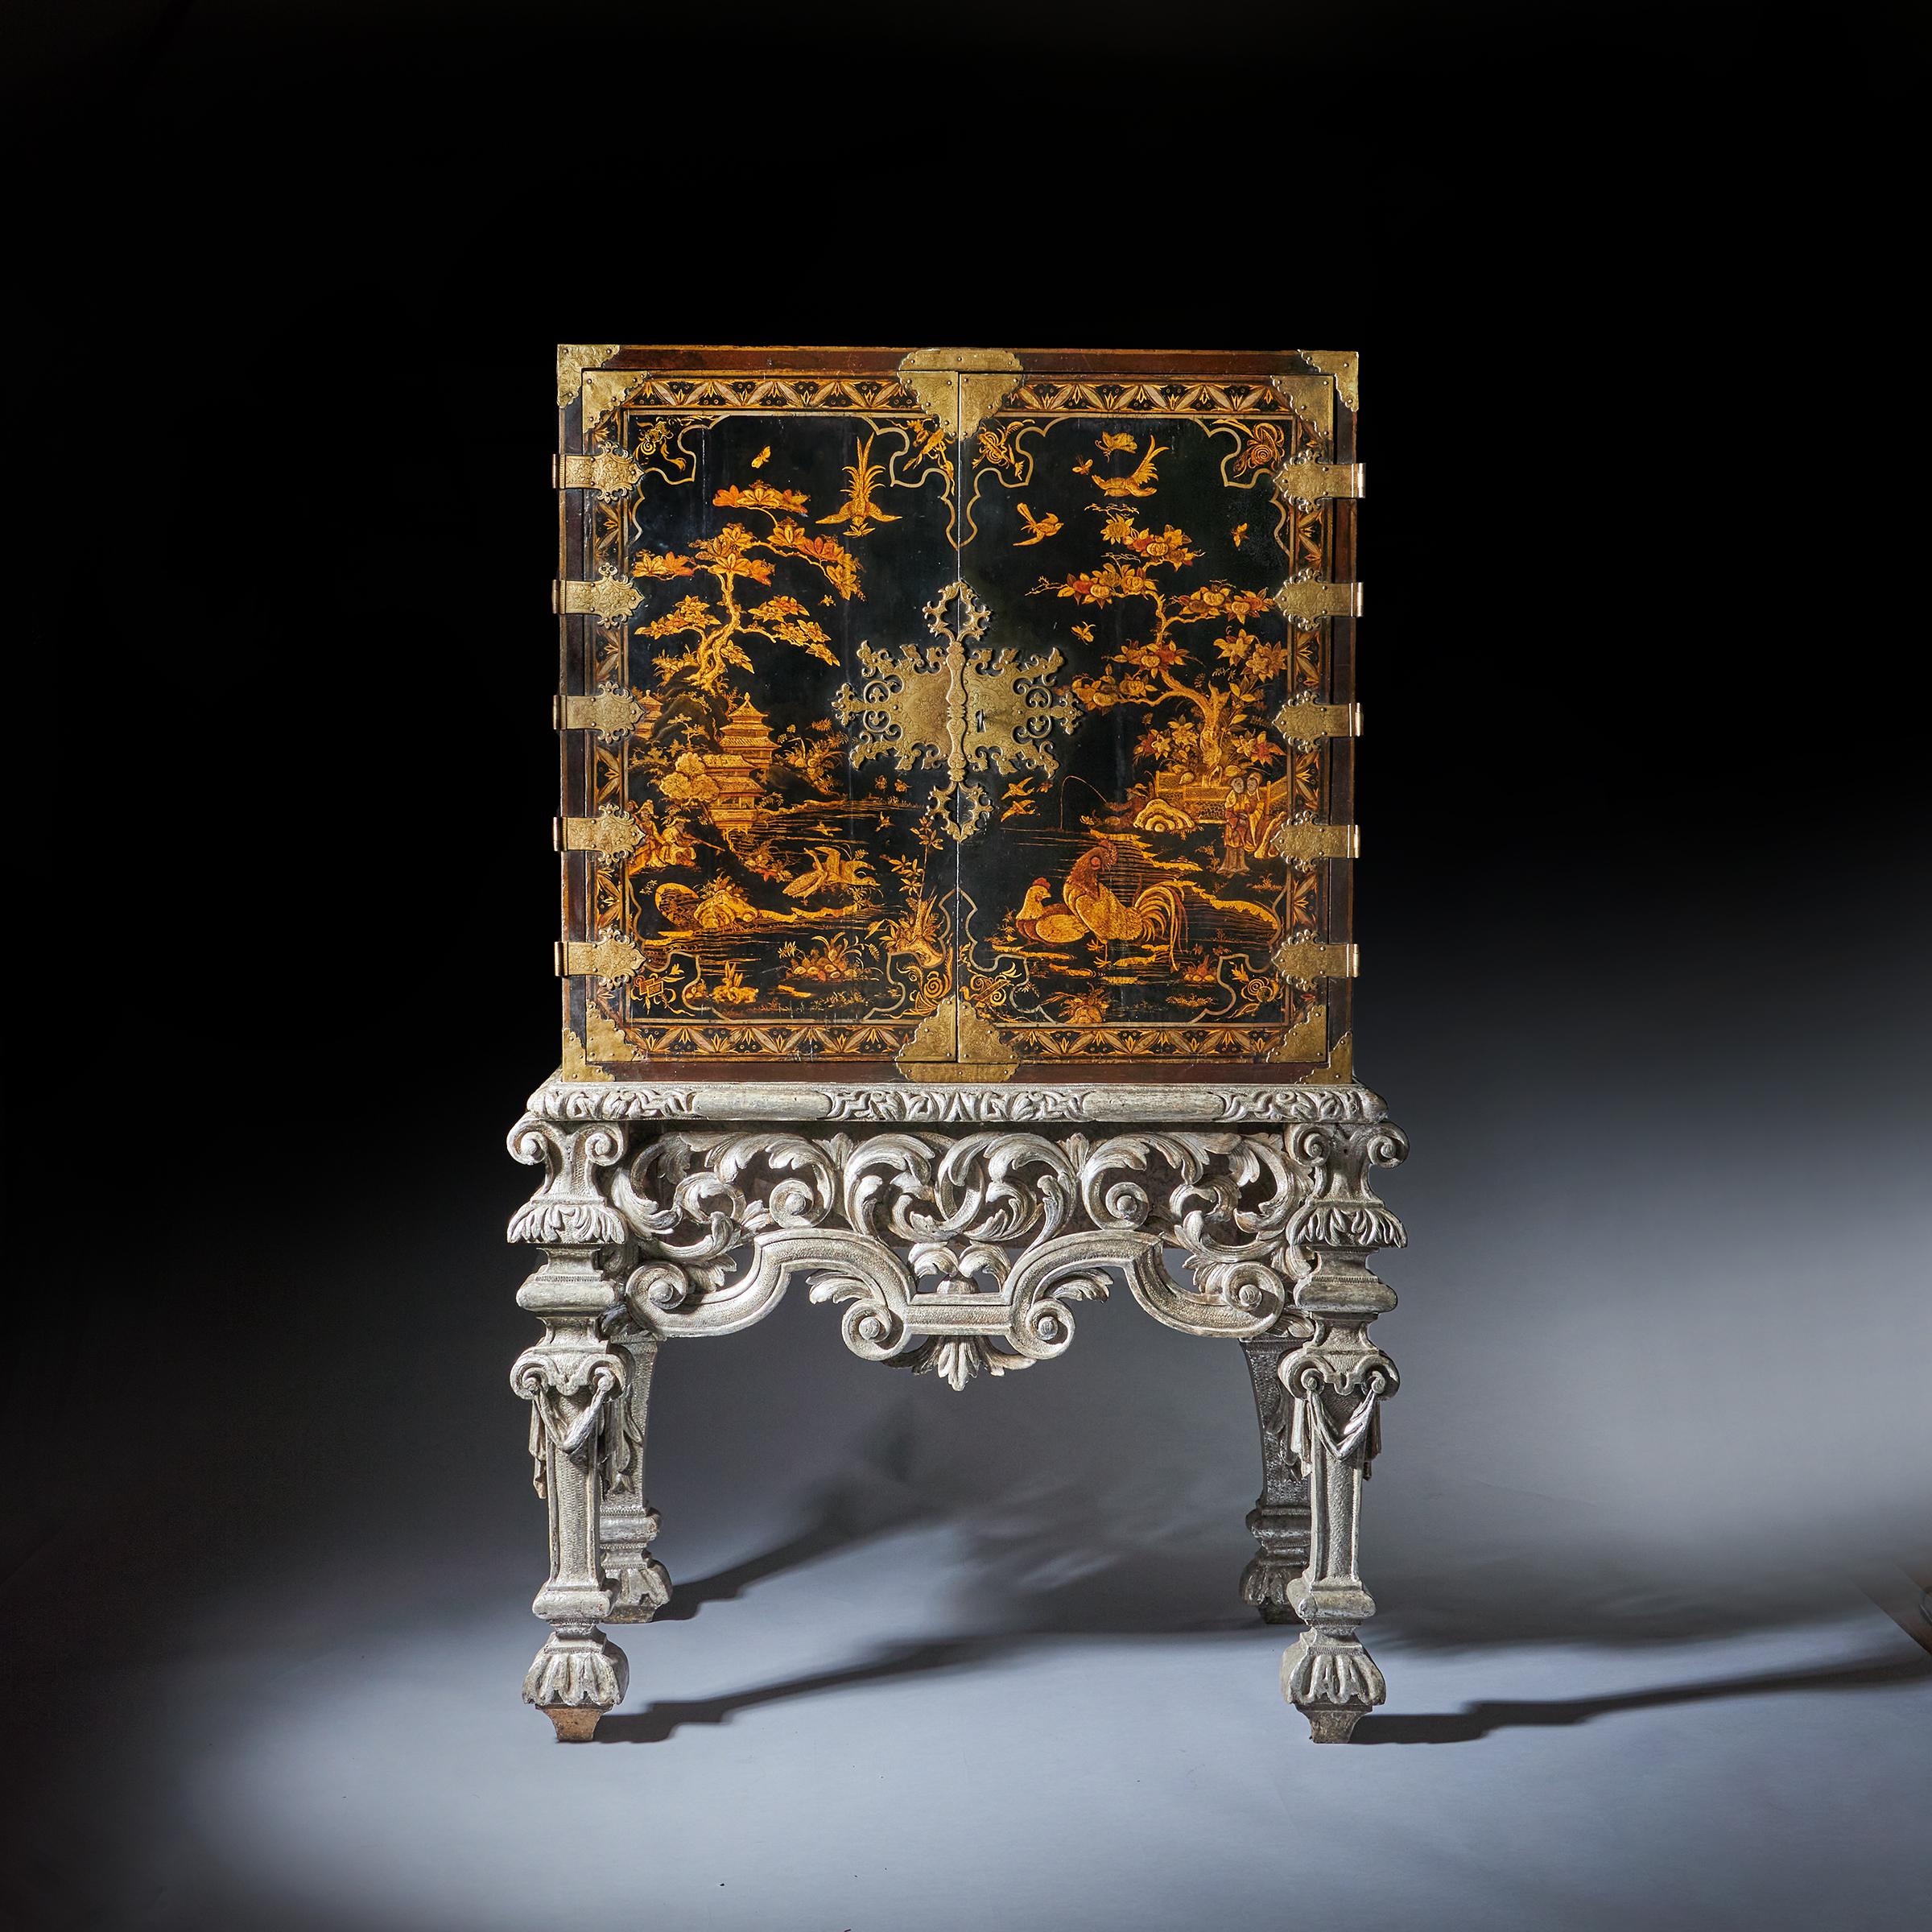 An important and exceptional quality late 17th century William and Mary japanned cabinet on original carved silver gilt stand, C.1690-1700

The upper part, decorated with coastal landscapes depicting homes, figural scenes, fauna and flora with a